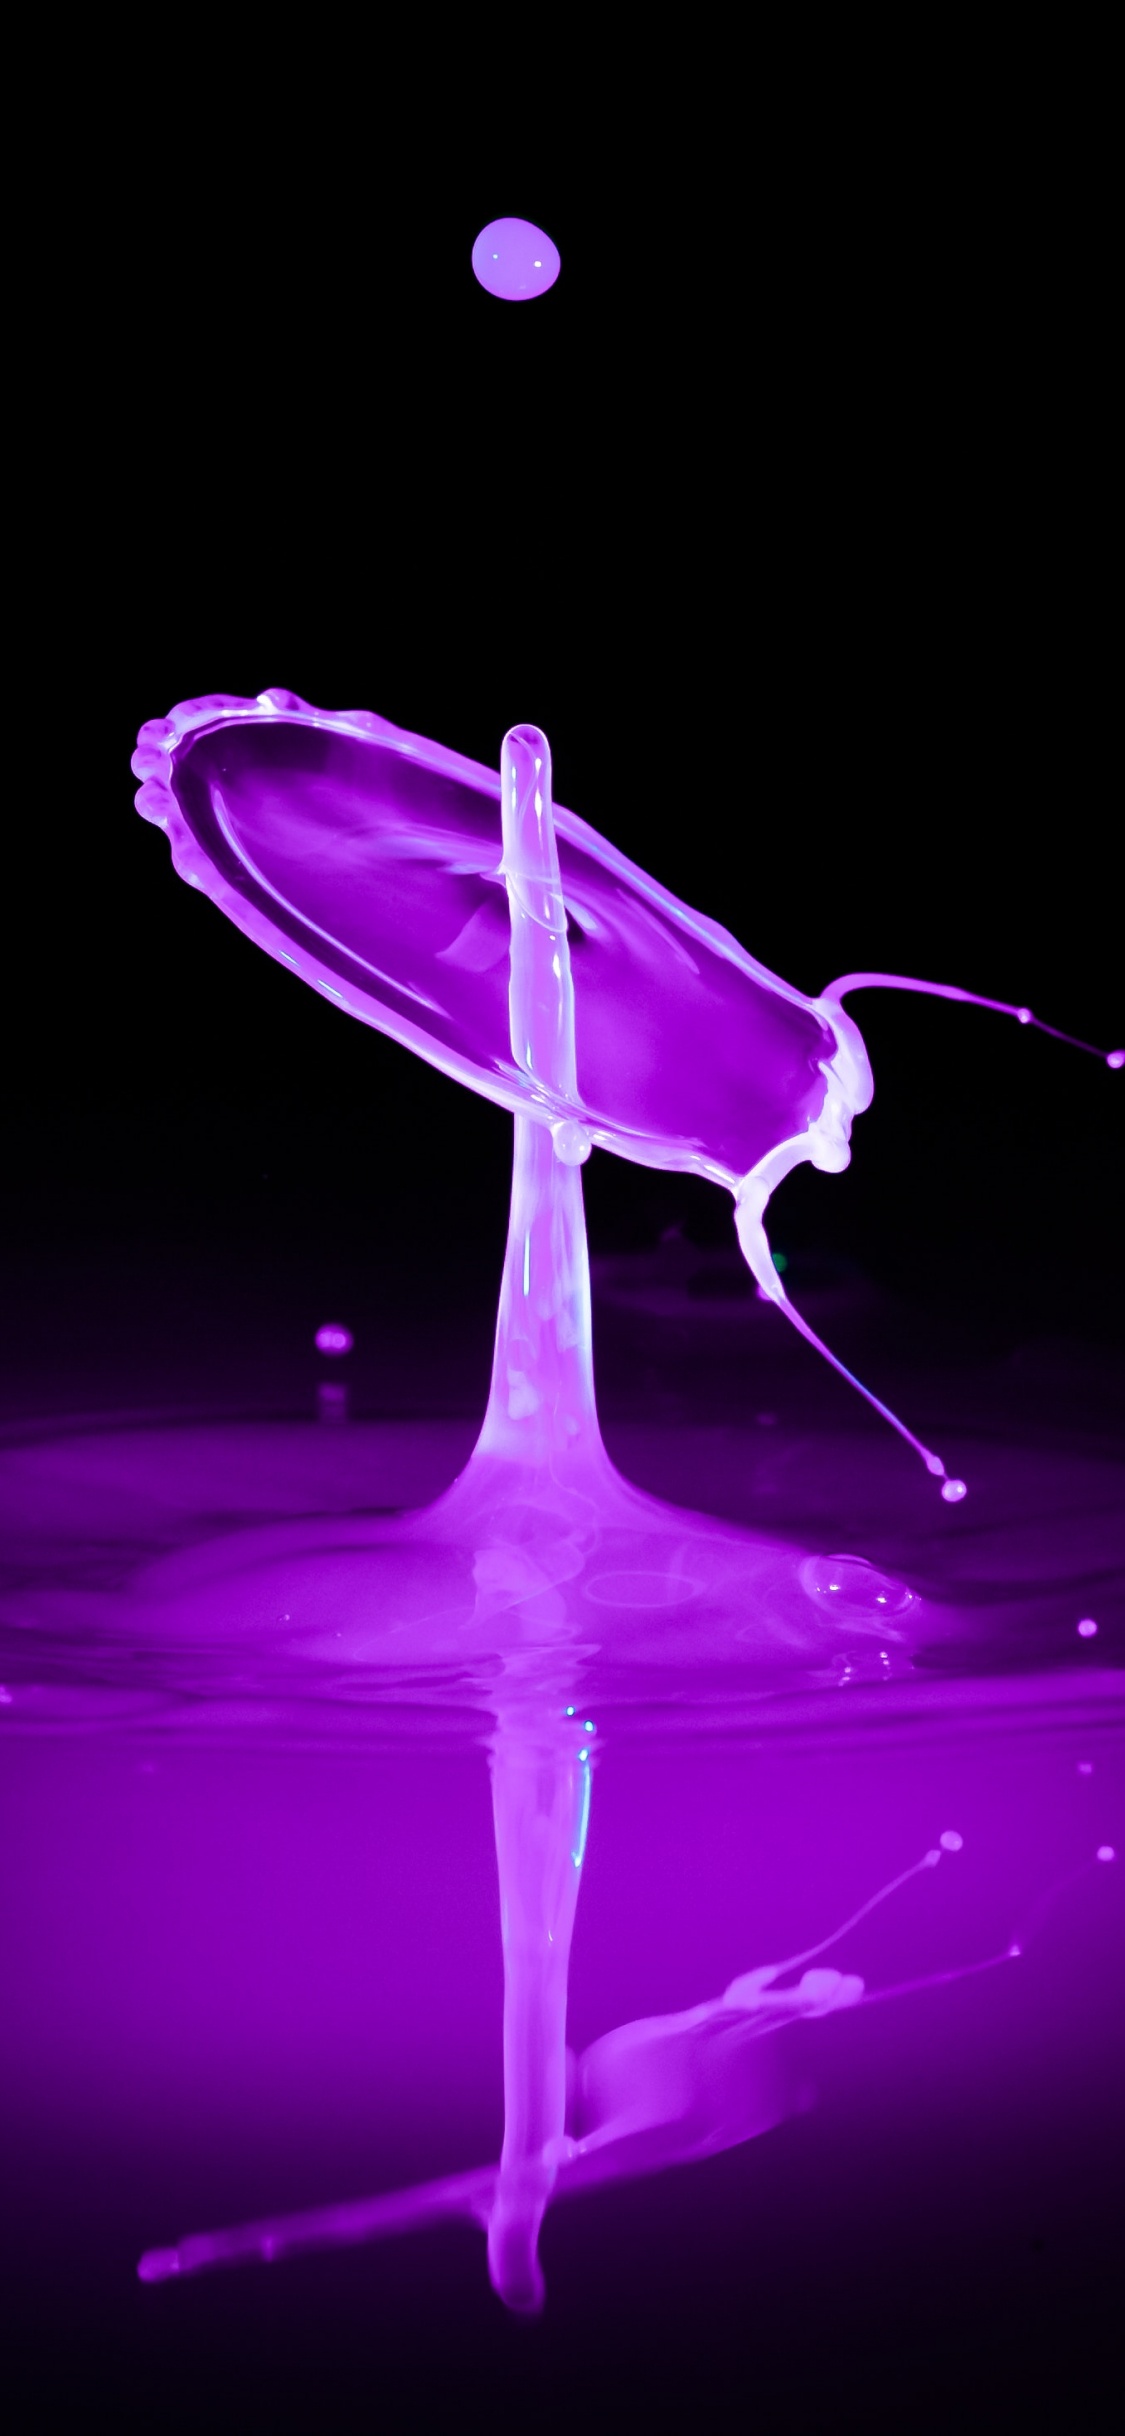 Purple and White Light Illustration. Wallpaper in 1125x2436 Resolution